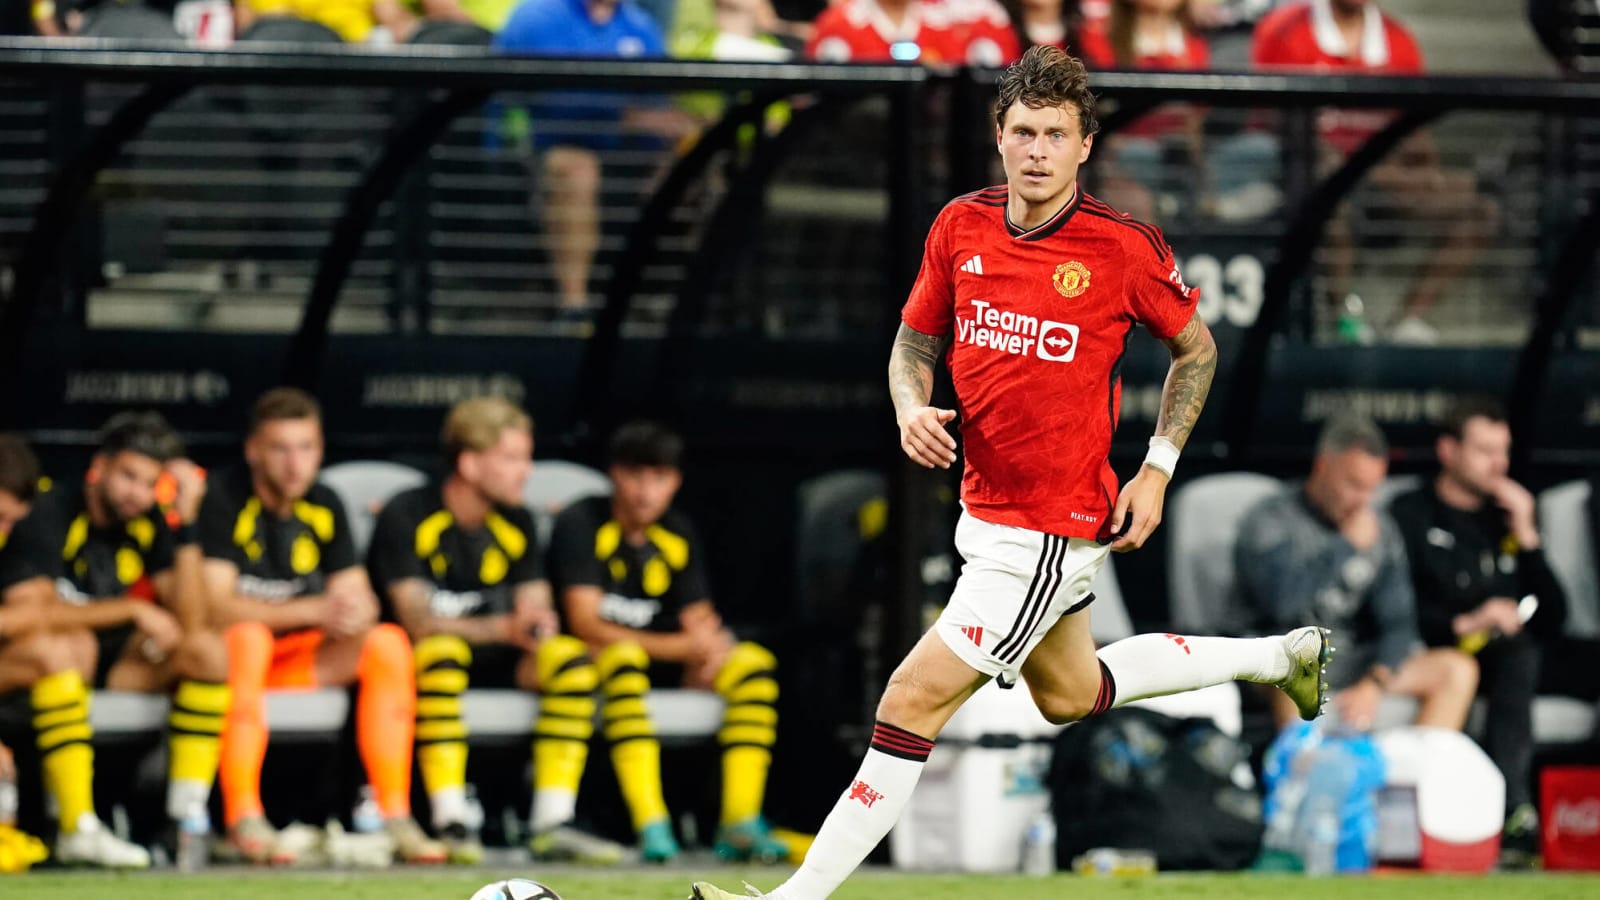 Sweden manager names his captain after conversation with Victor Lindelof